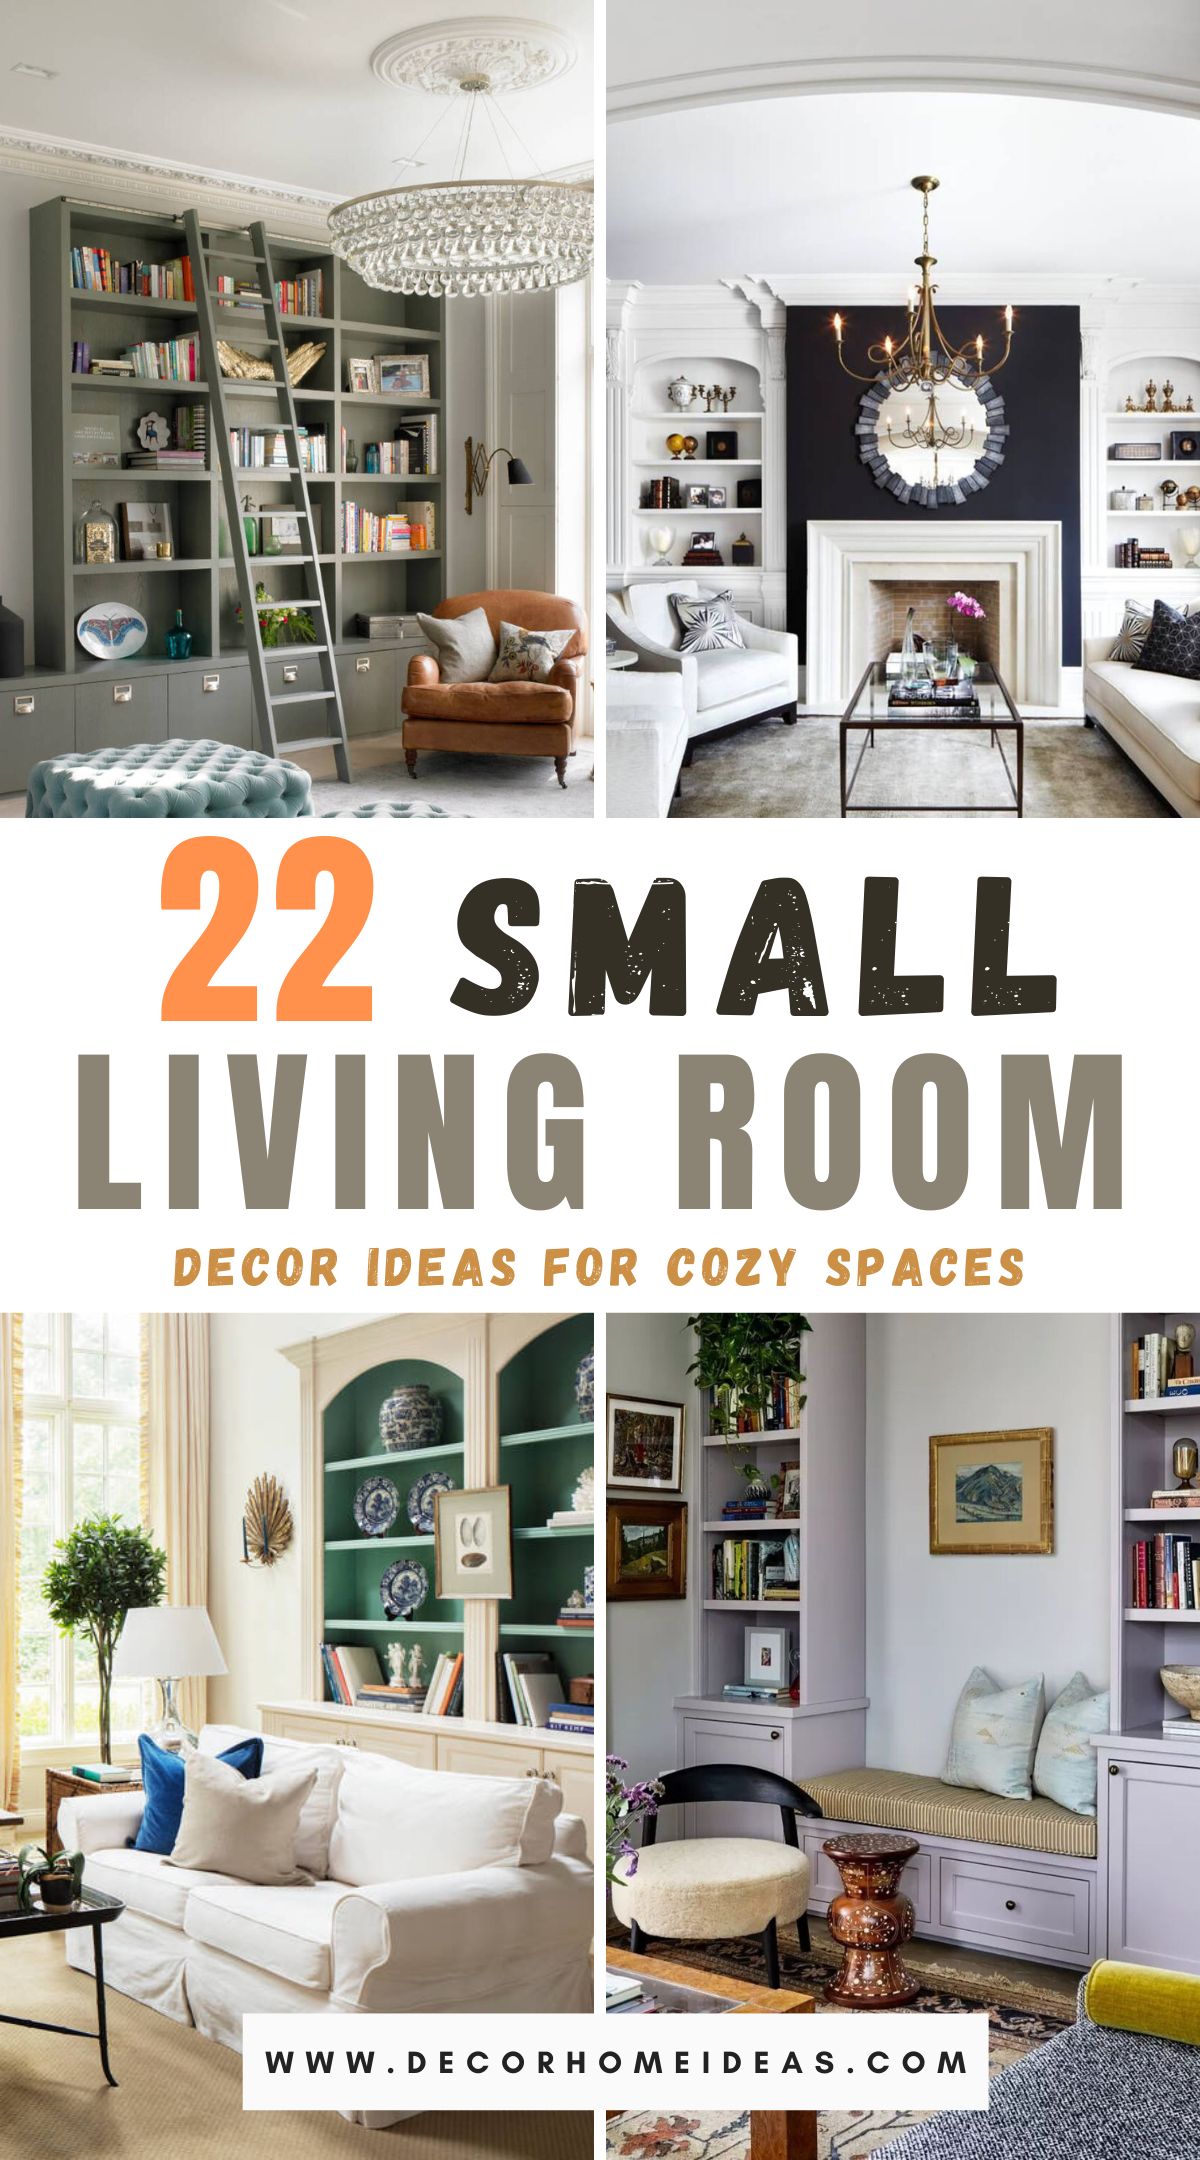 Transform your small living room with these 22 ingenious decor ideas. From space-saving furniture to clever storage solutions, discover innovative ways to maximize every inch and create a stylish and functional living space that feels larger than life.